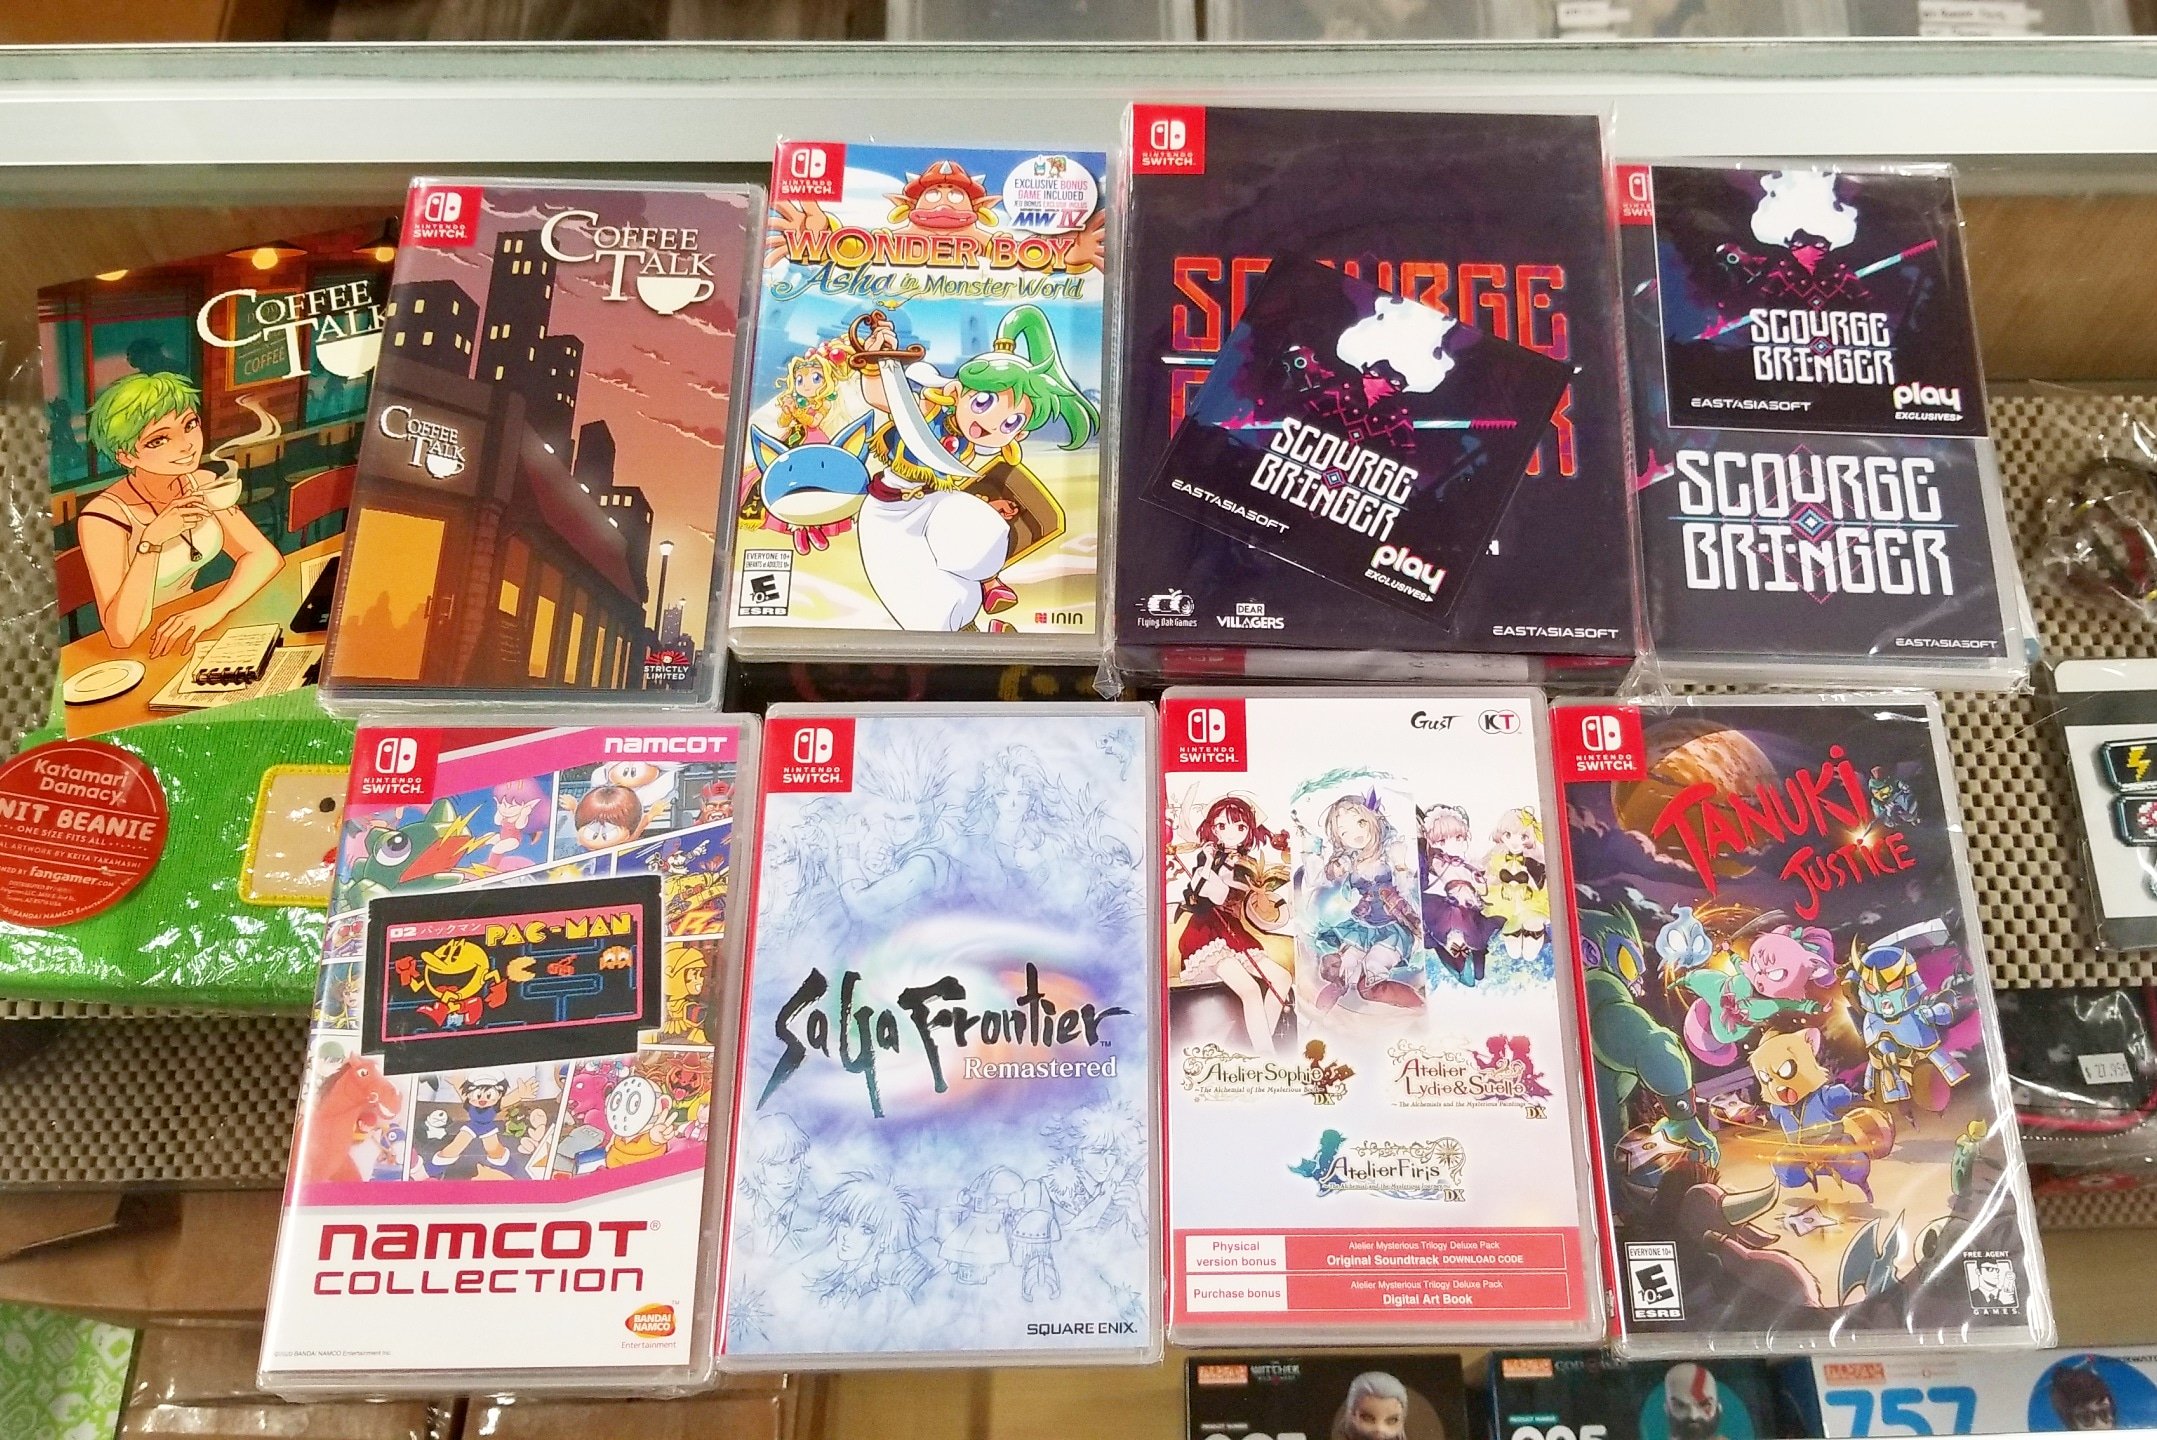 Variety of video games including, Pac-Man, Saga Frontier Remastered,  Atelier Sophie: , and Tanuki Justice for the Nintendo Switch